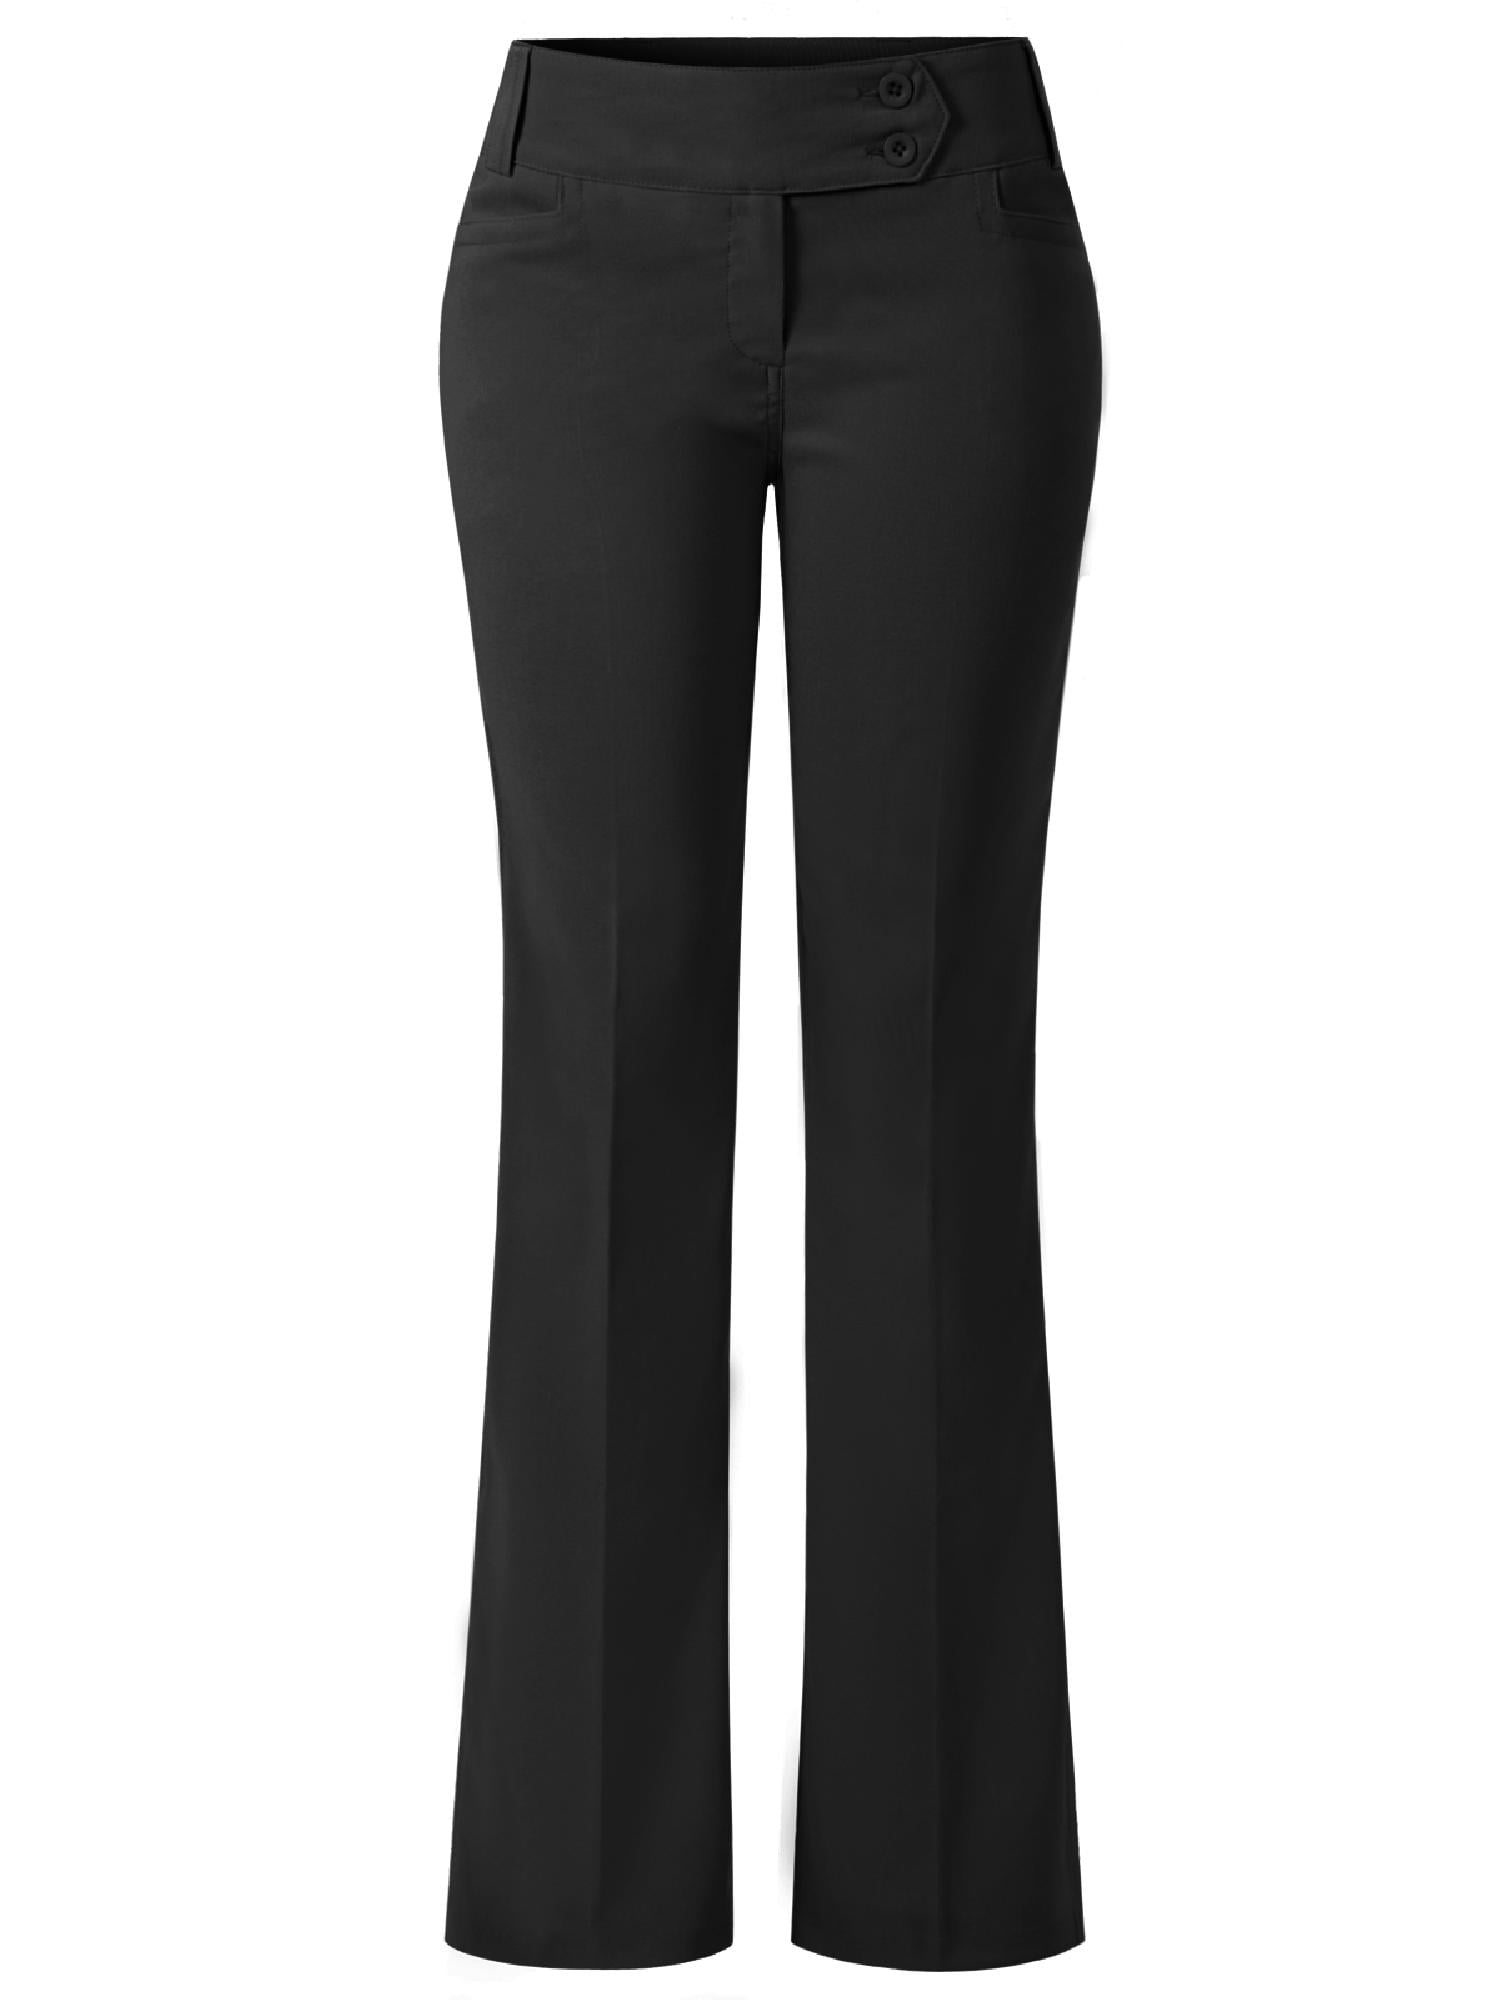 MixMatchy Women's Relaxed Boot-Cut Stretch Office Pants Trousers Slacks ...